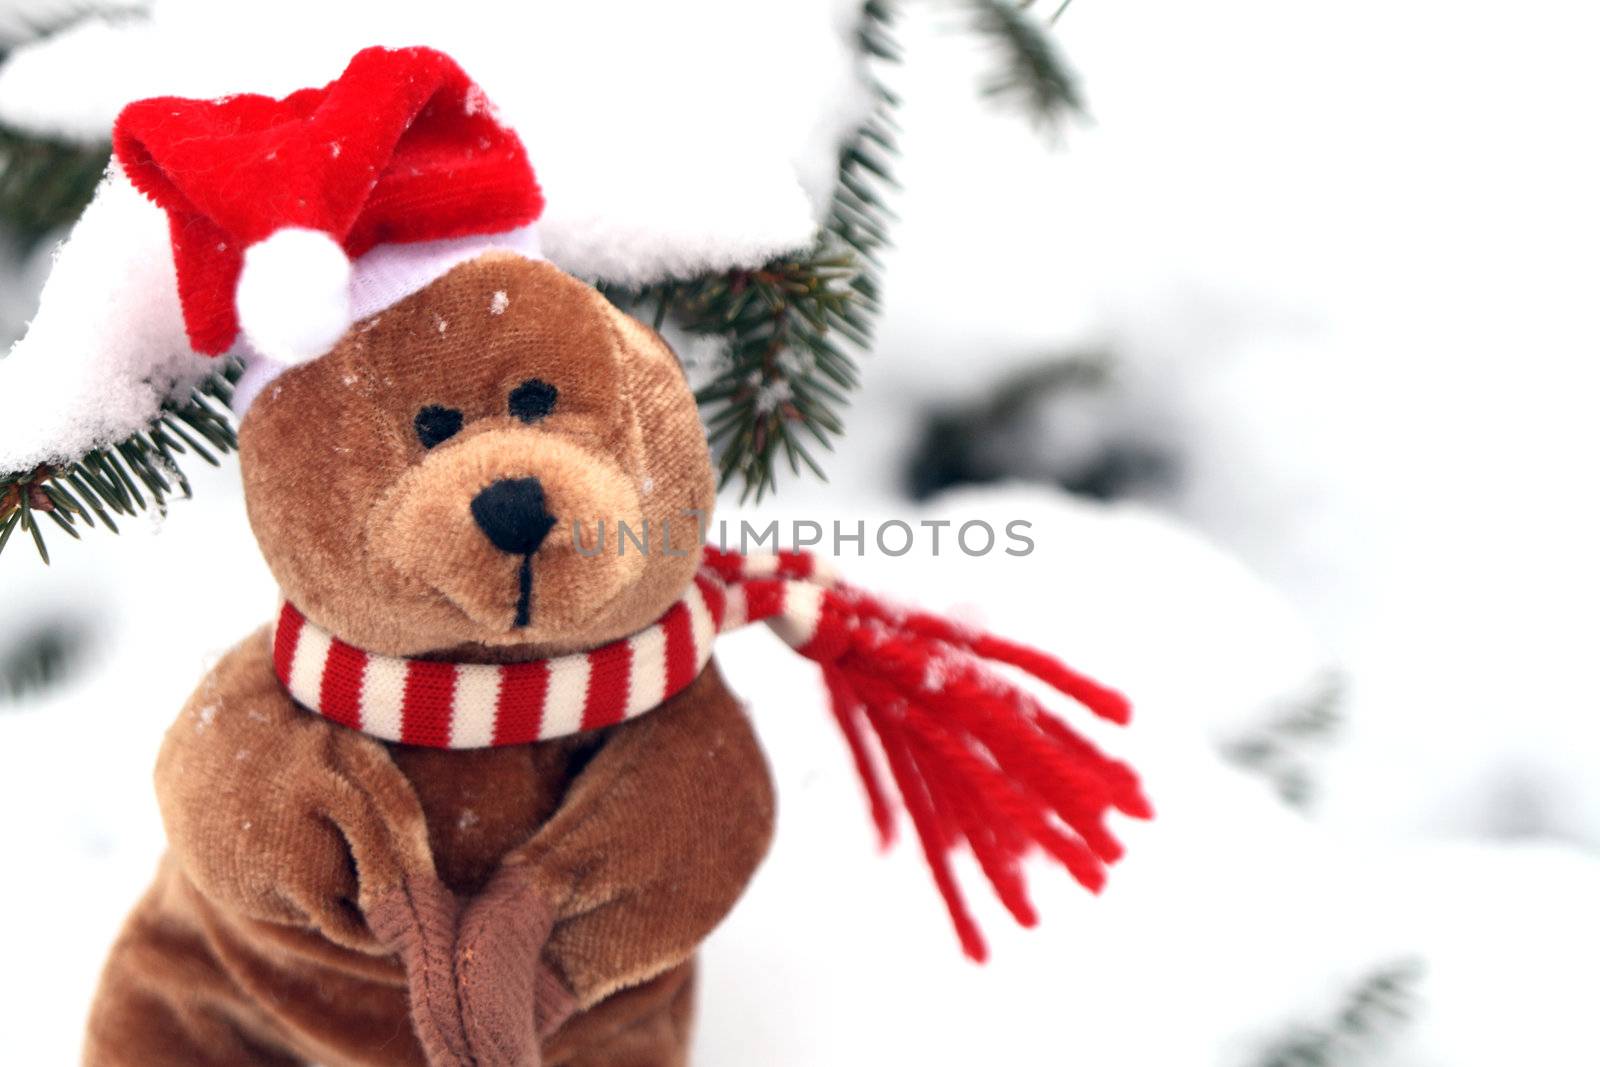 Christmas Teddy Bear isolated on background with snow and firtree